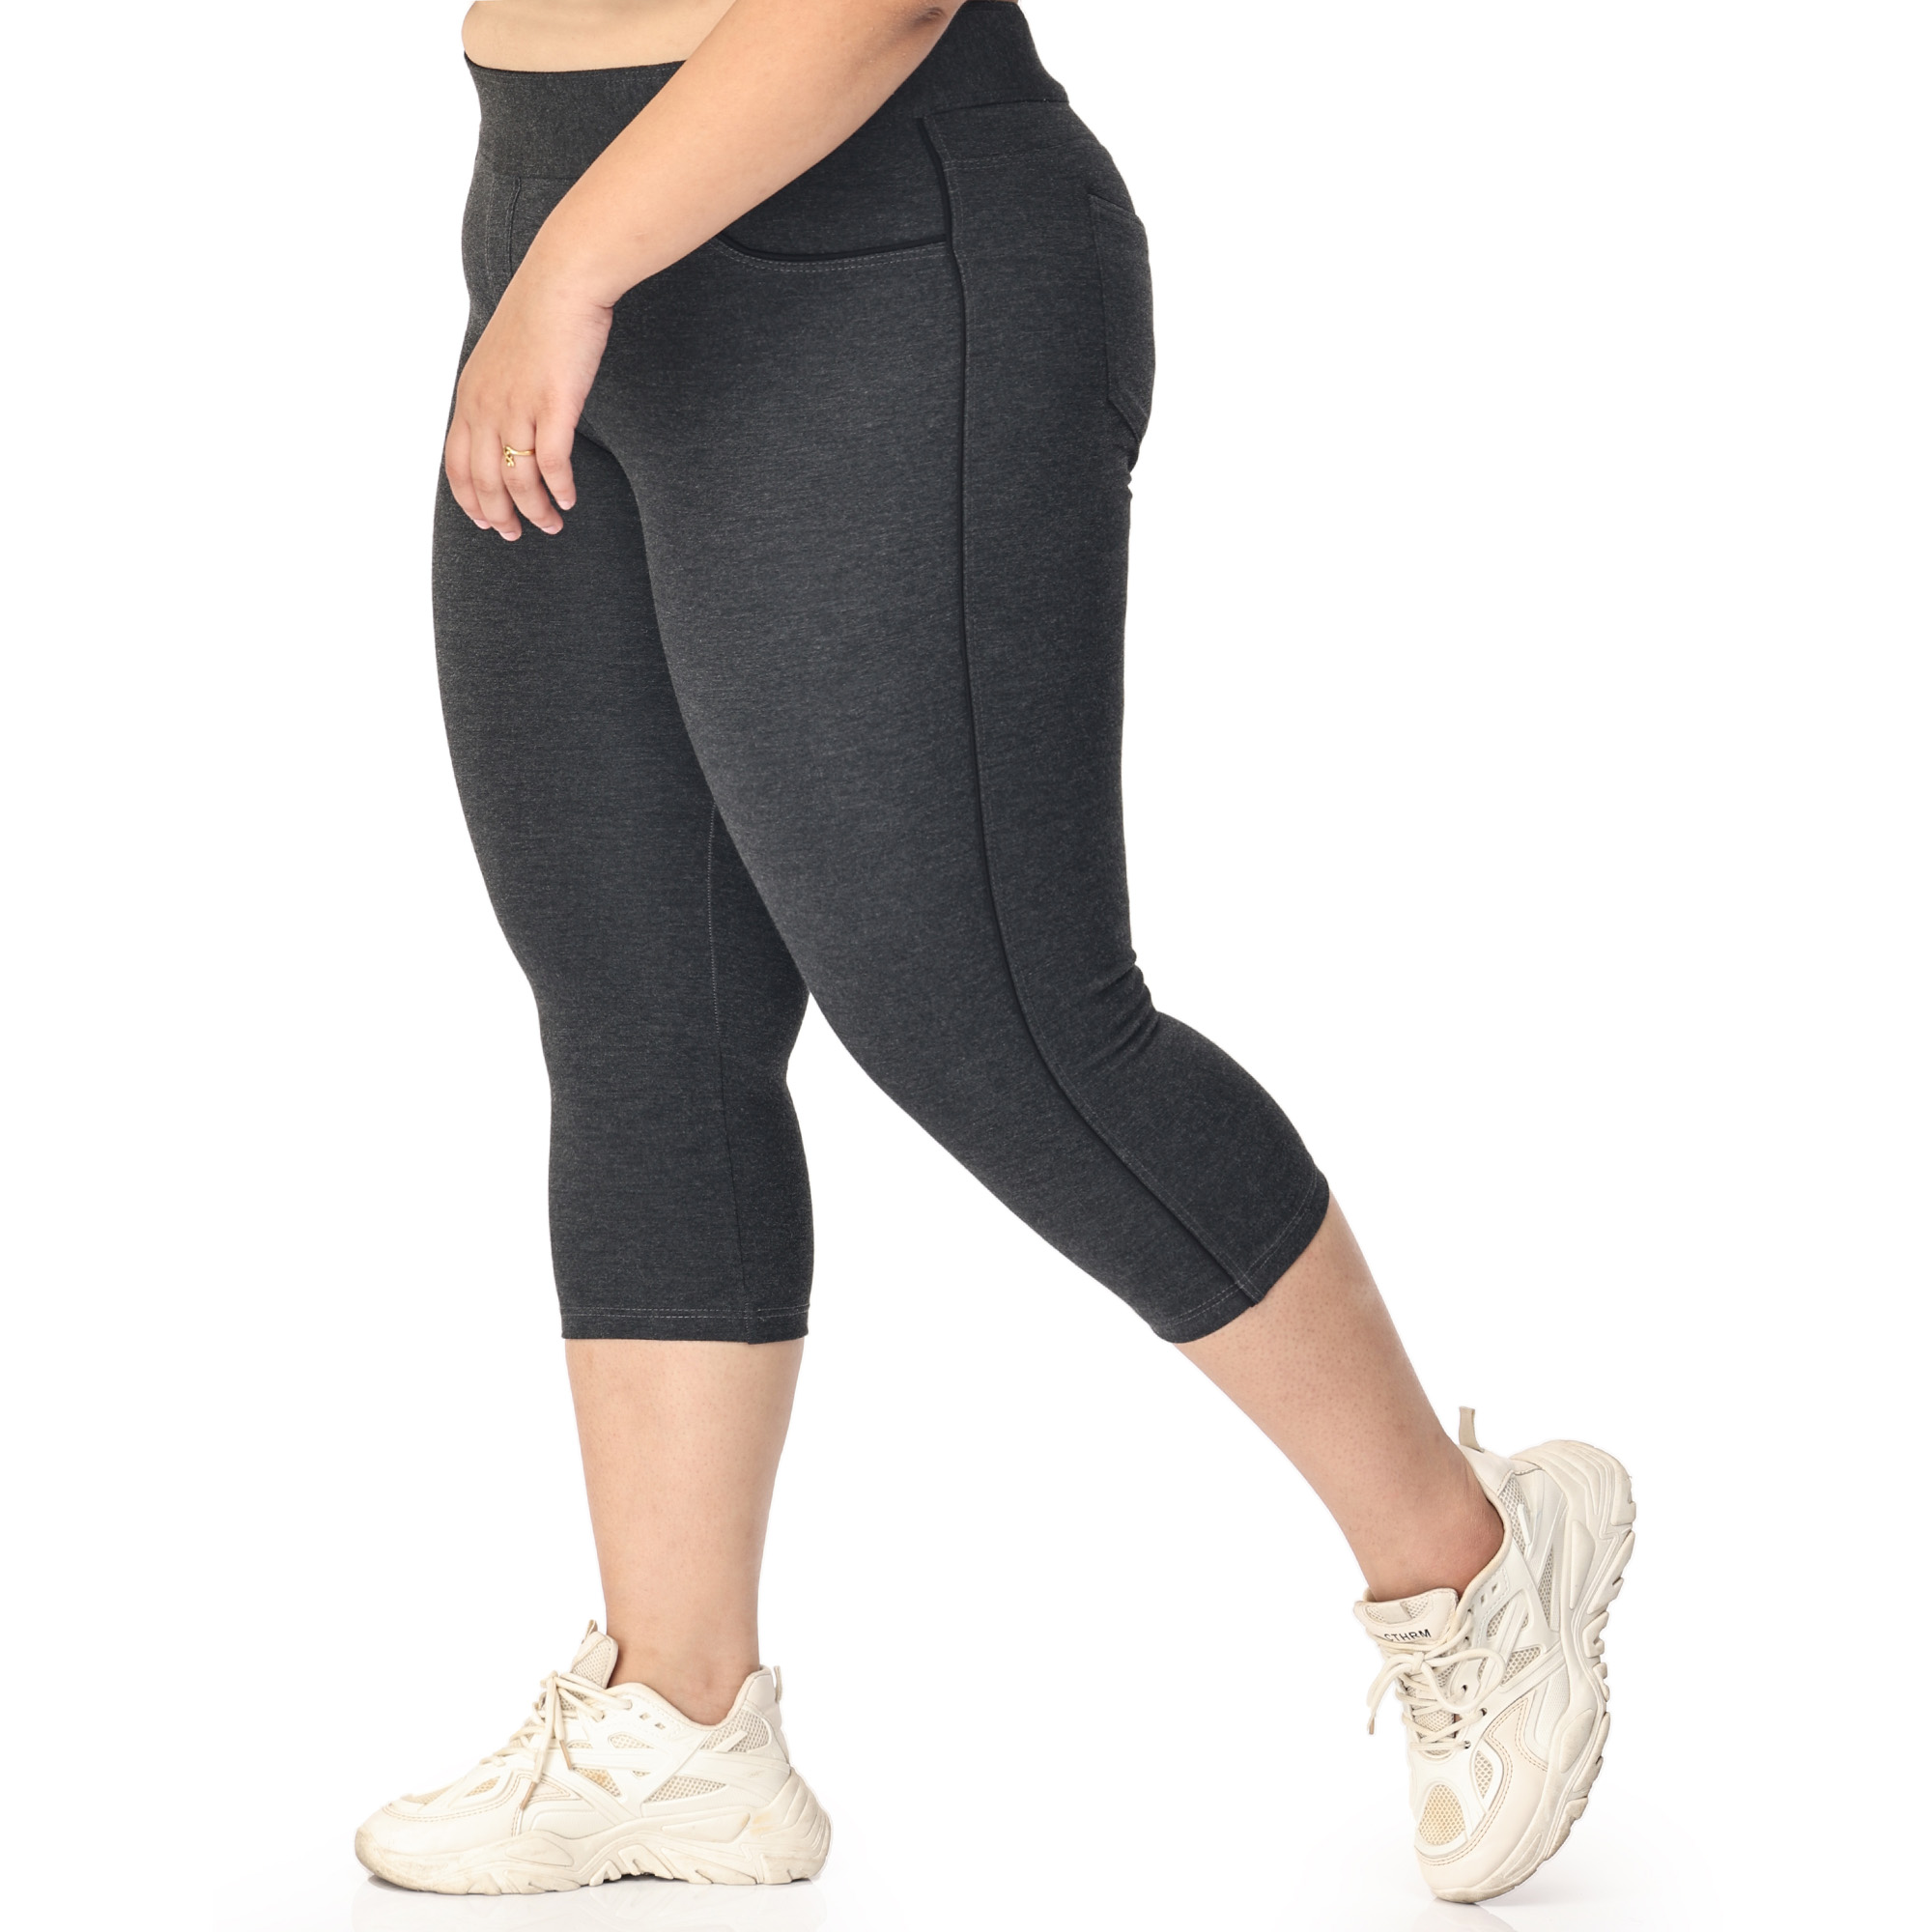 Charcoal grey capris with piping women gym wear Low rise - Belore Slims